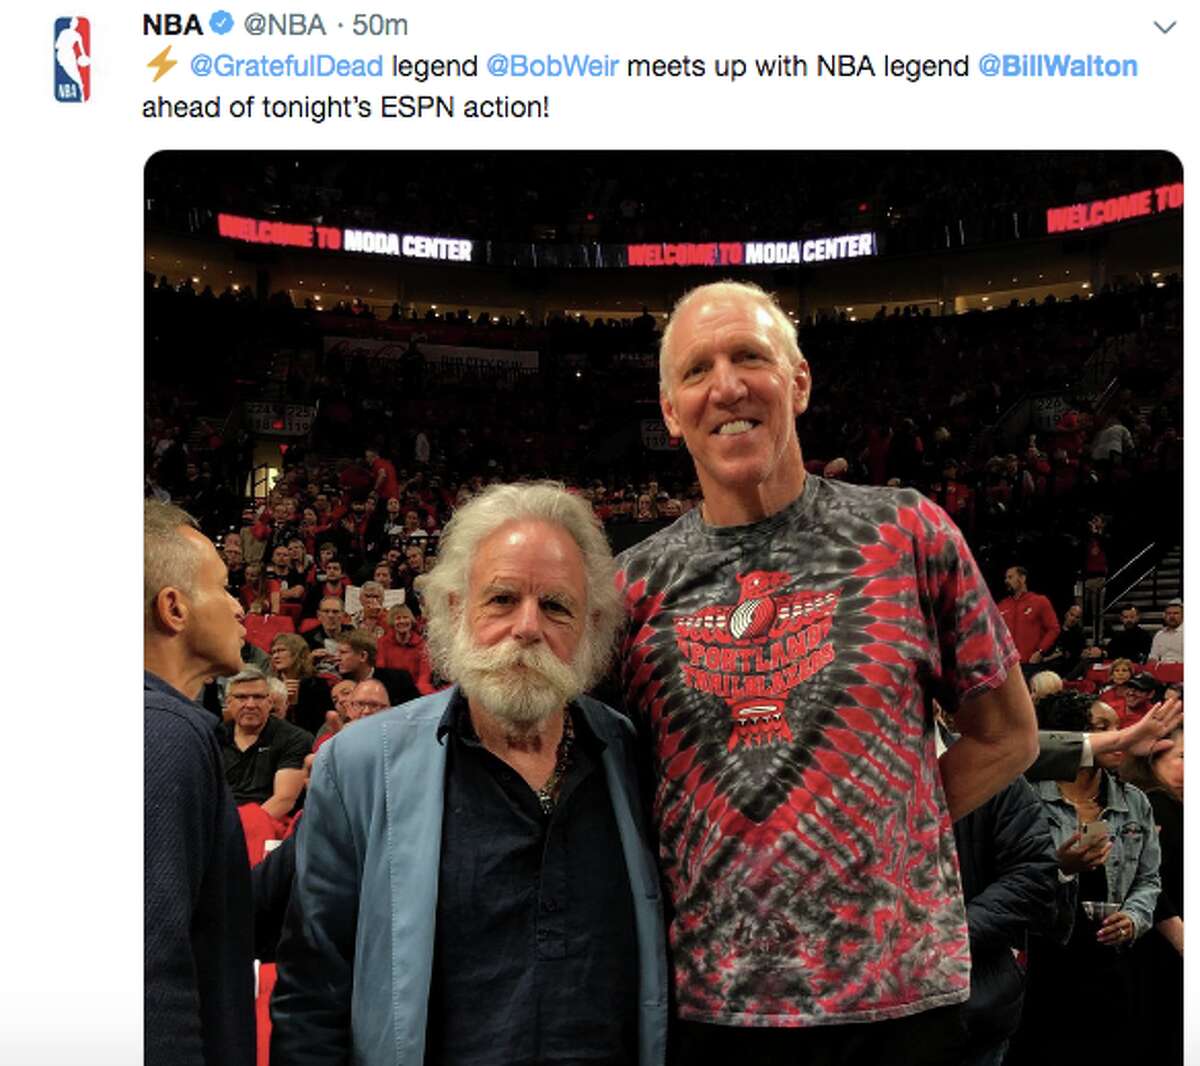 Former NBA player Bill Walton and Grateful Dead member Bob Weir at Game 4 of the Western Conference Finals.